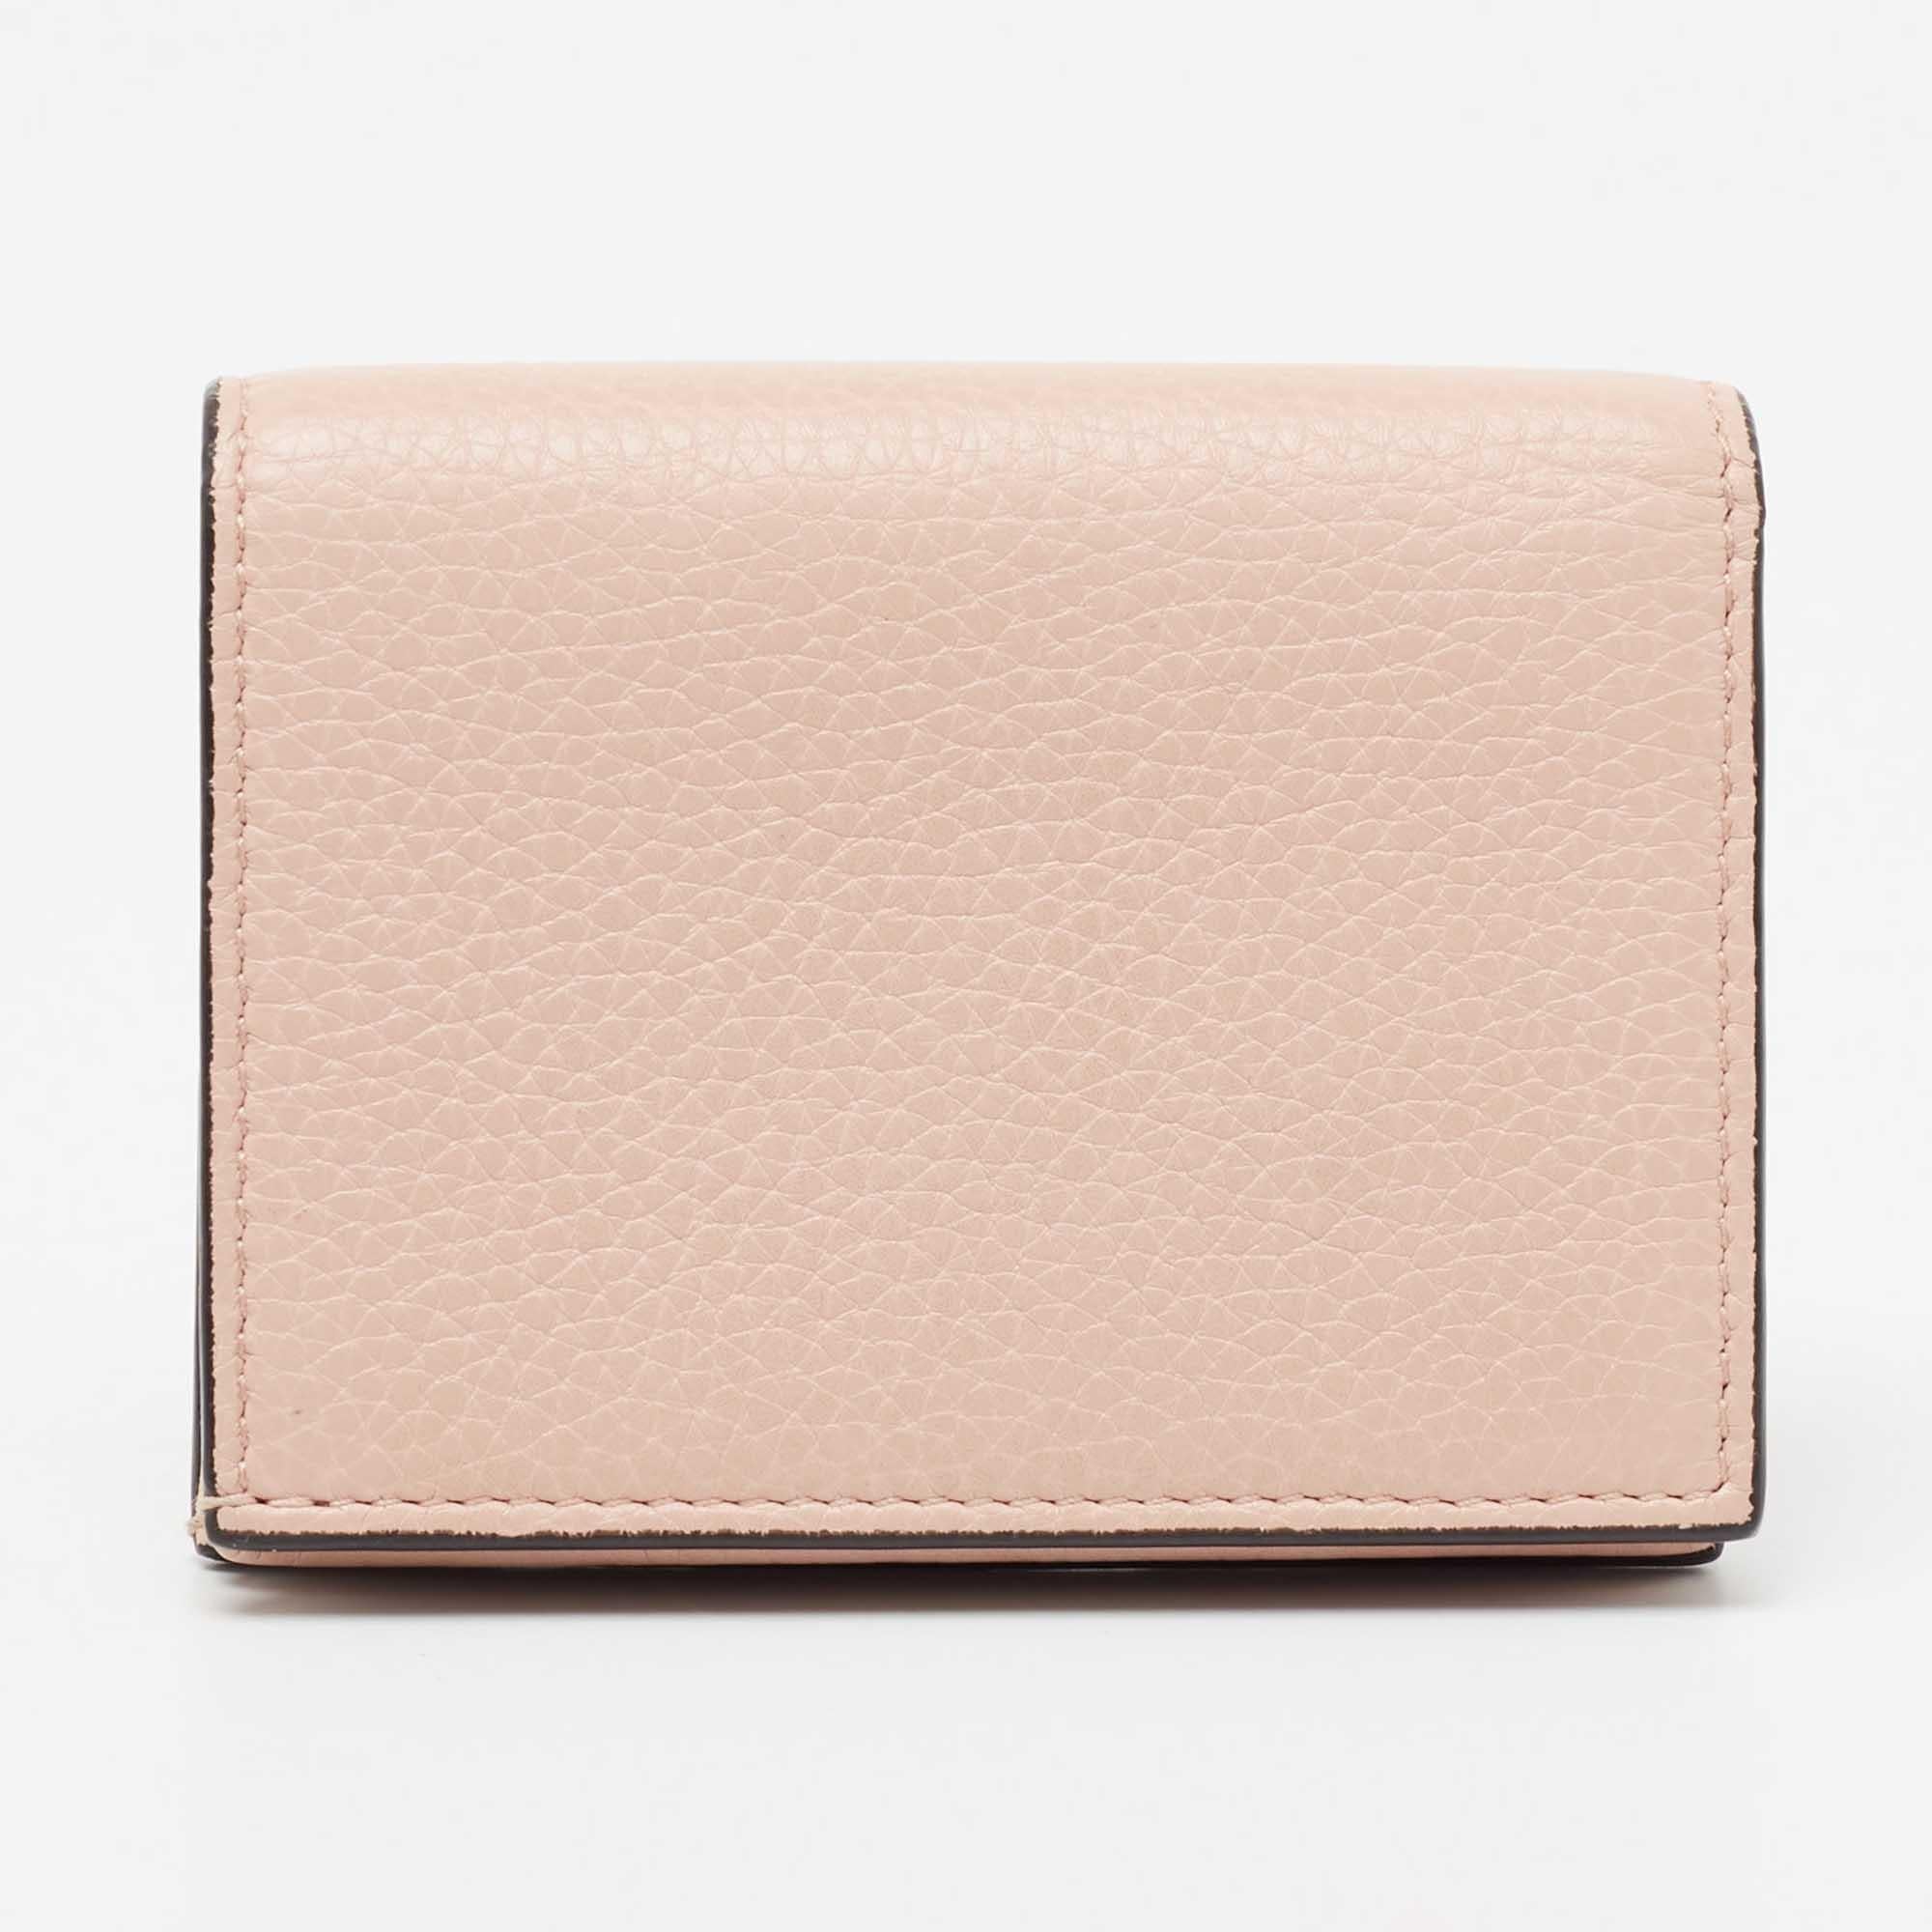 This 'Blind for Love' card case from Gucci is a stylish creation that is exceptionally well-made. Crafted from light-pink leather, this case is embellished beautifully with a gold-toned inscription and Bee motif on the front. It unveils a